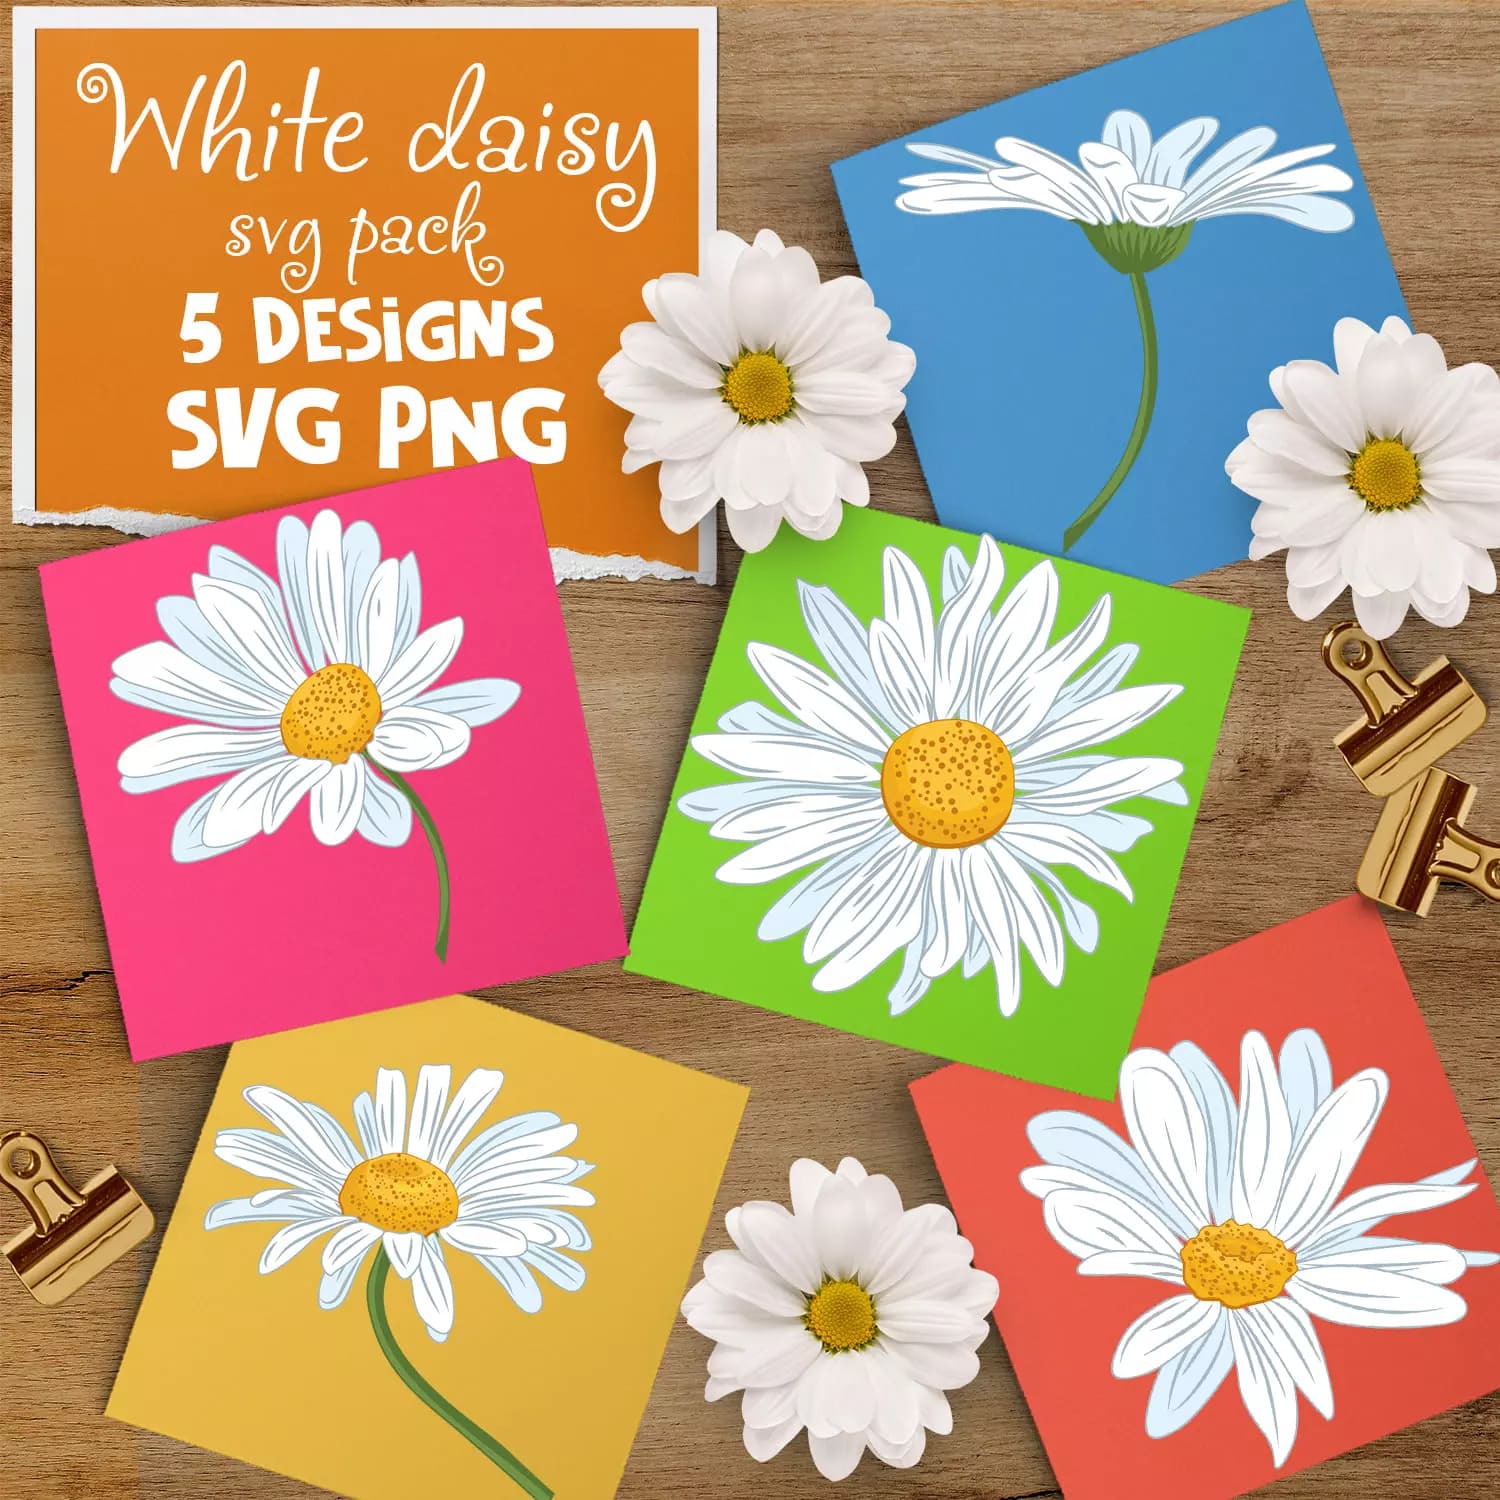 White Daisy SVG Preview 5.